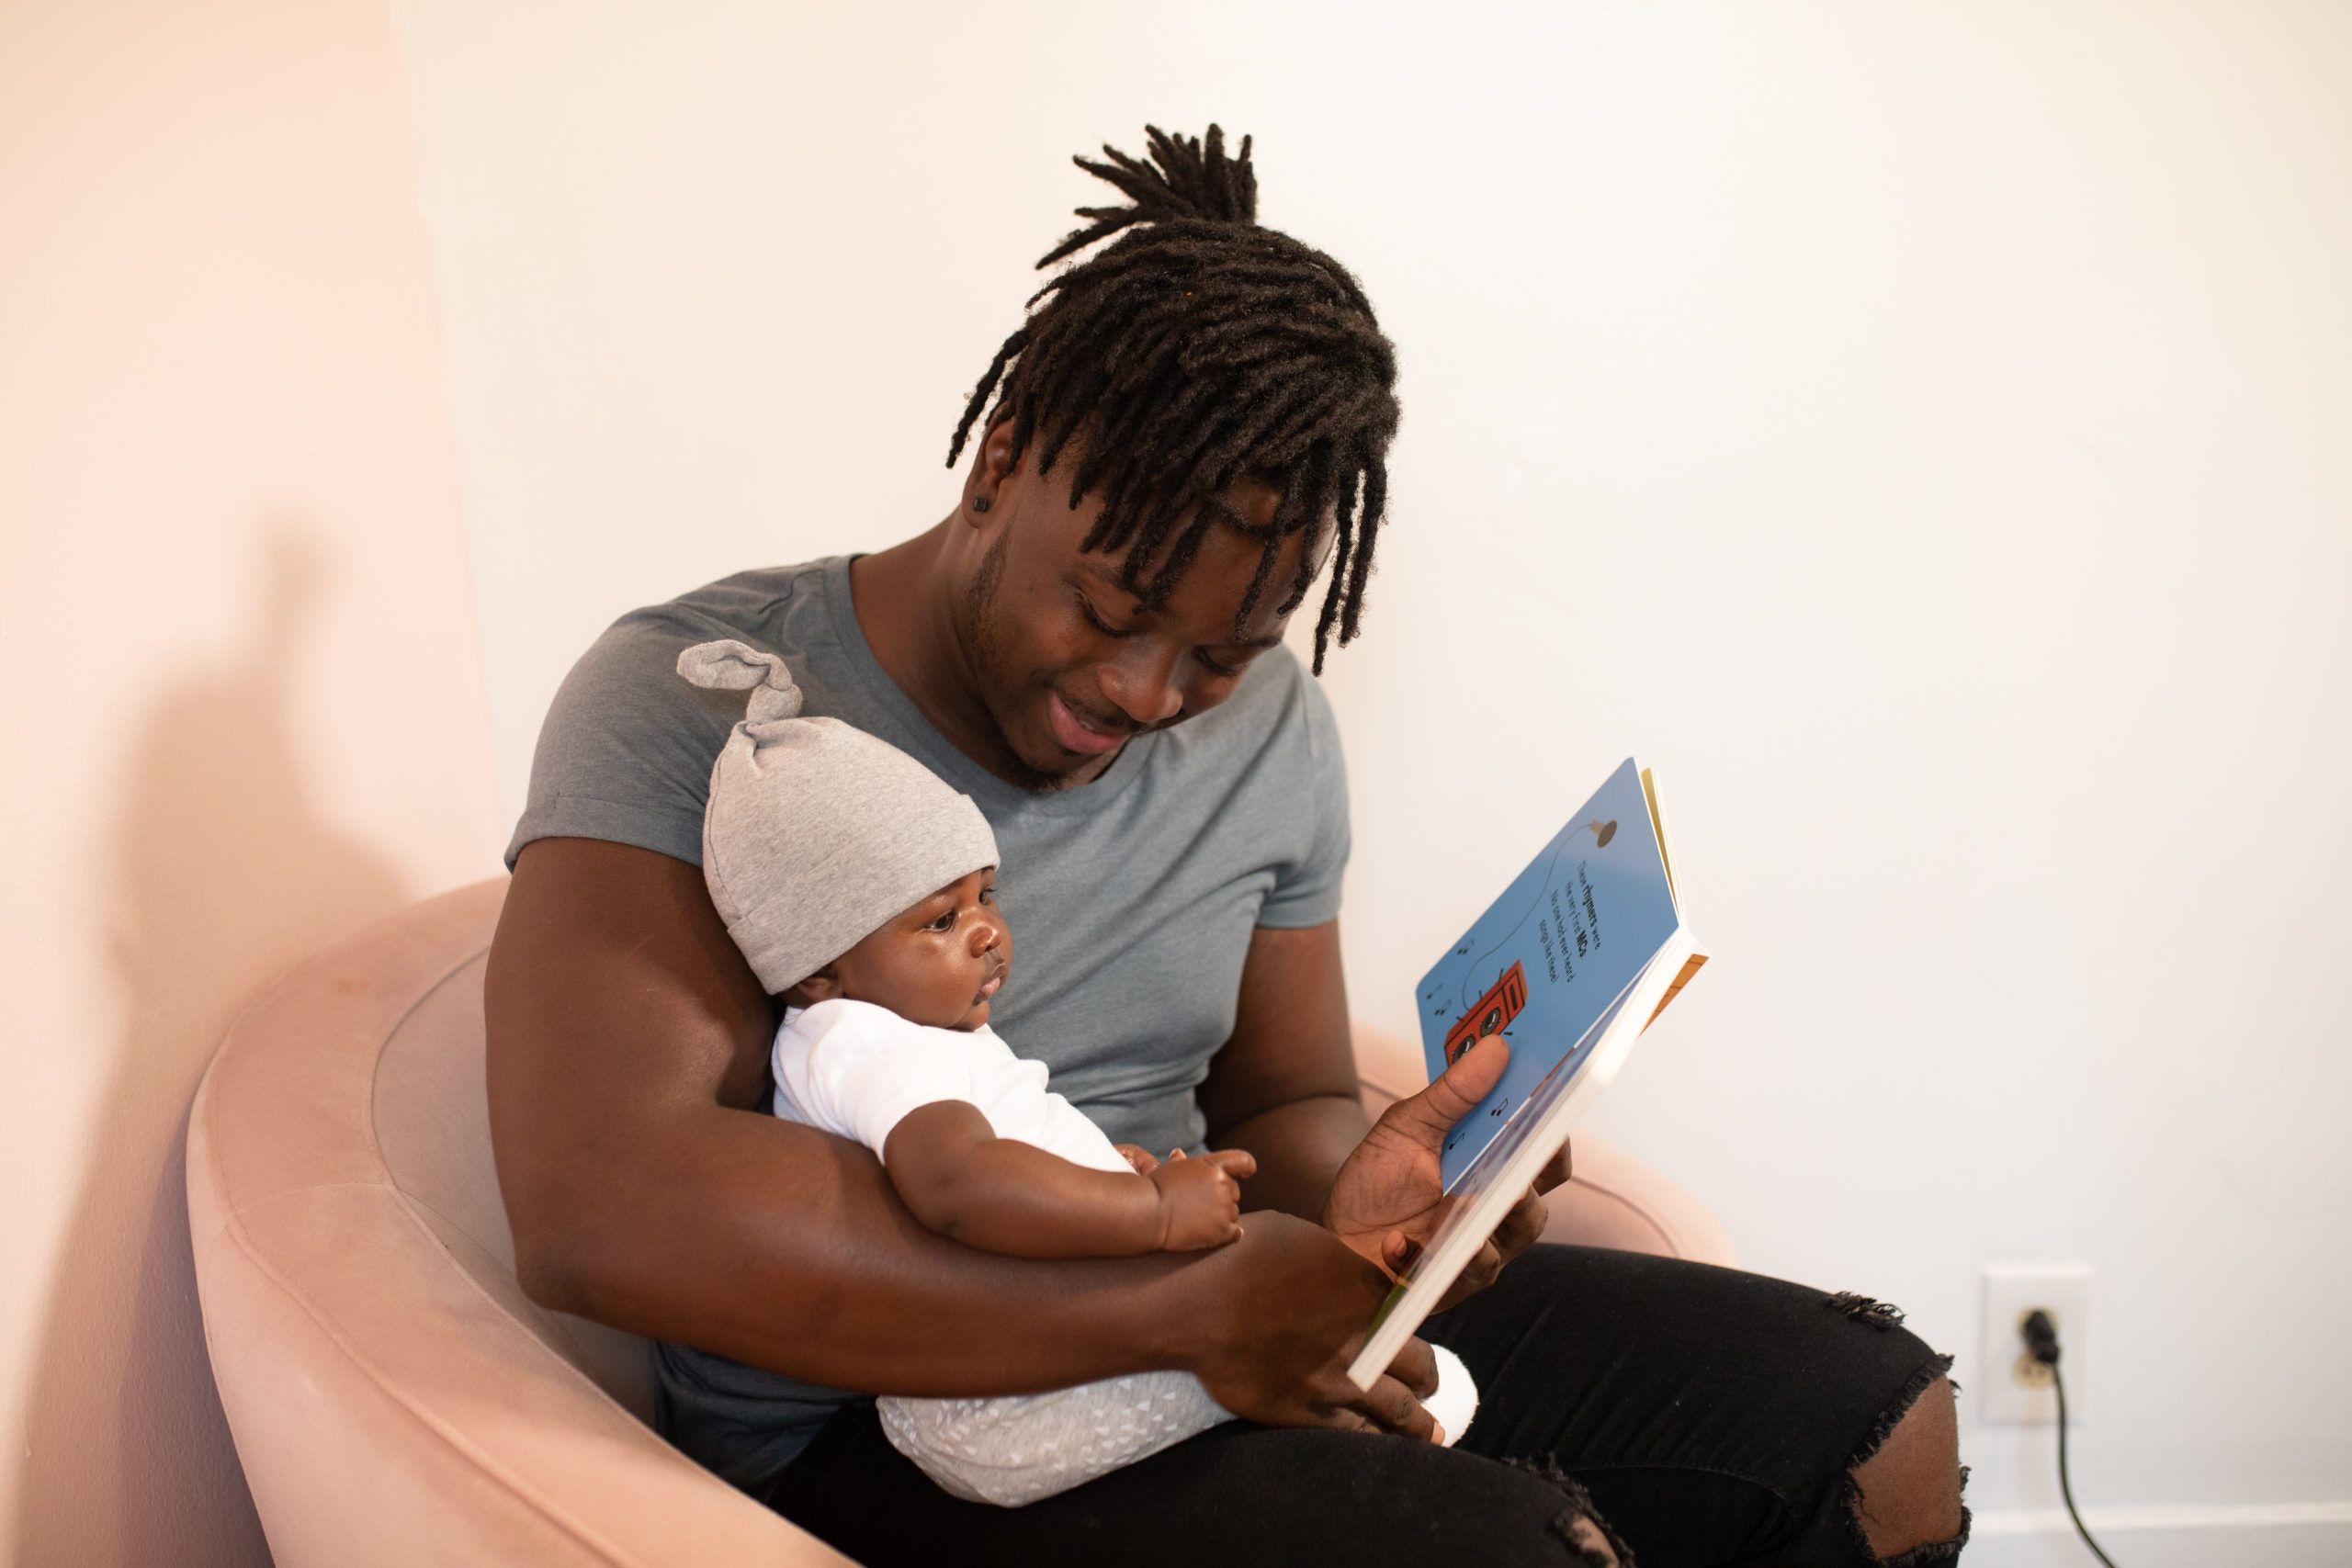 Photo by nappy: https://www.pexels.com/photo/a-father-reading-a-book-to-his-baby-3536643/